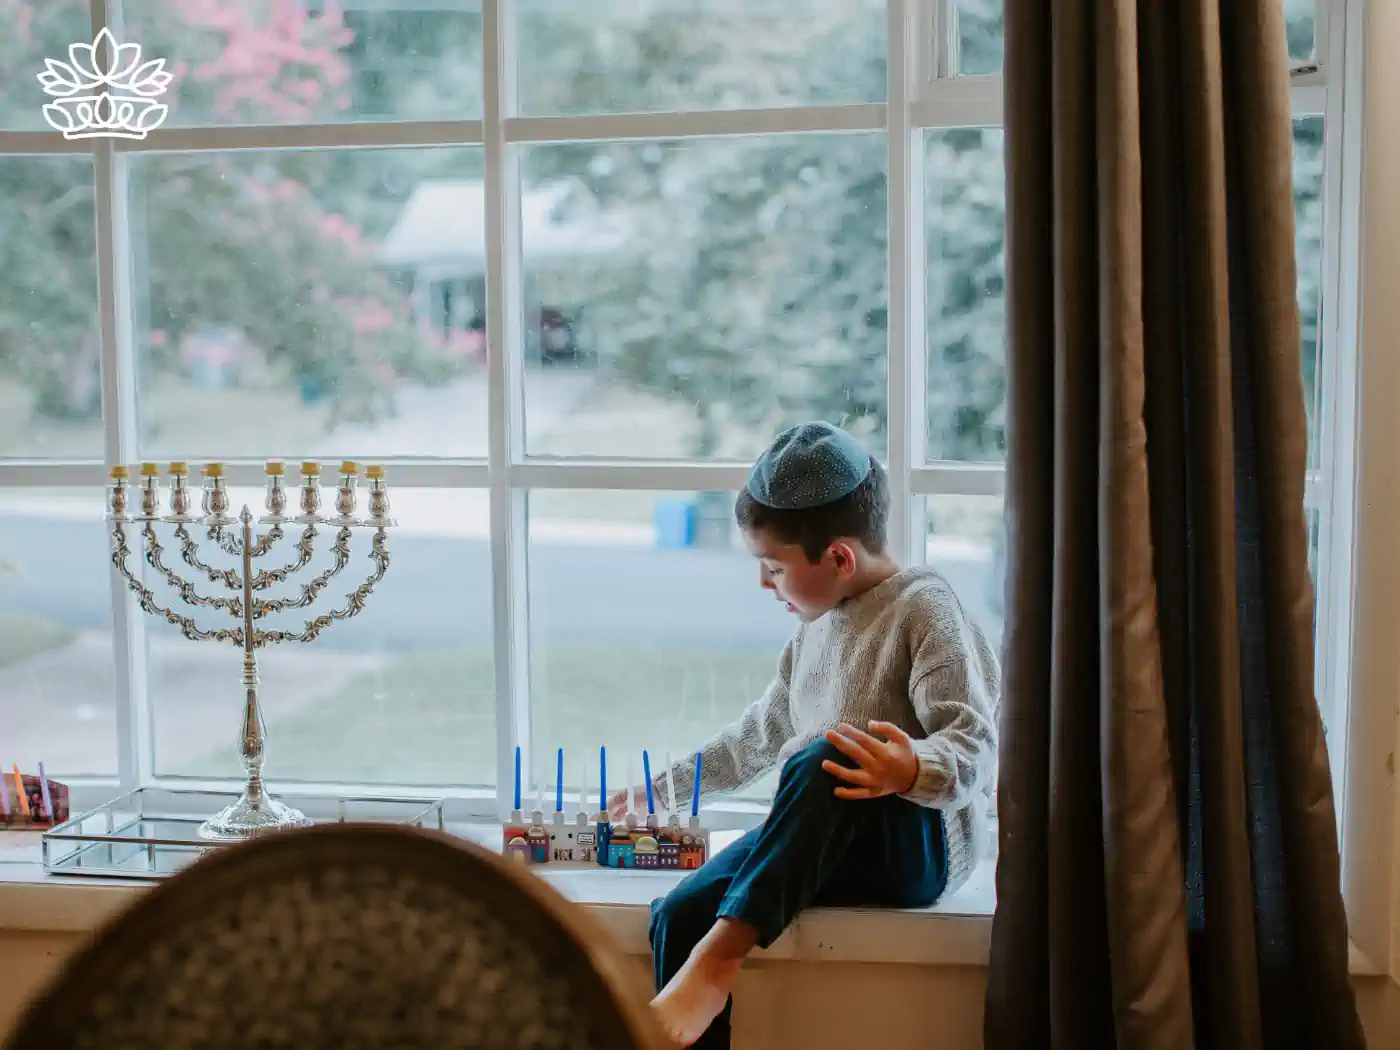 A young boy sitting by a window, gazing at a menorah with lit candles during Hanukkah. Fabulous Flowers and Gifts - Hanukkah Collection.